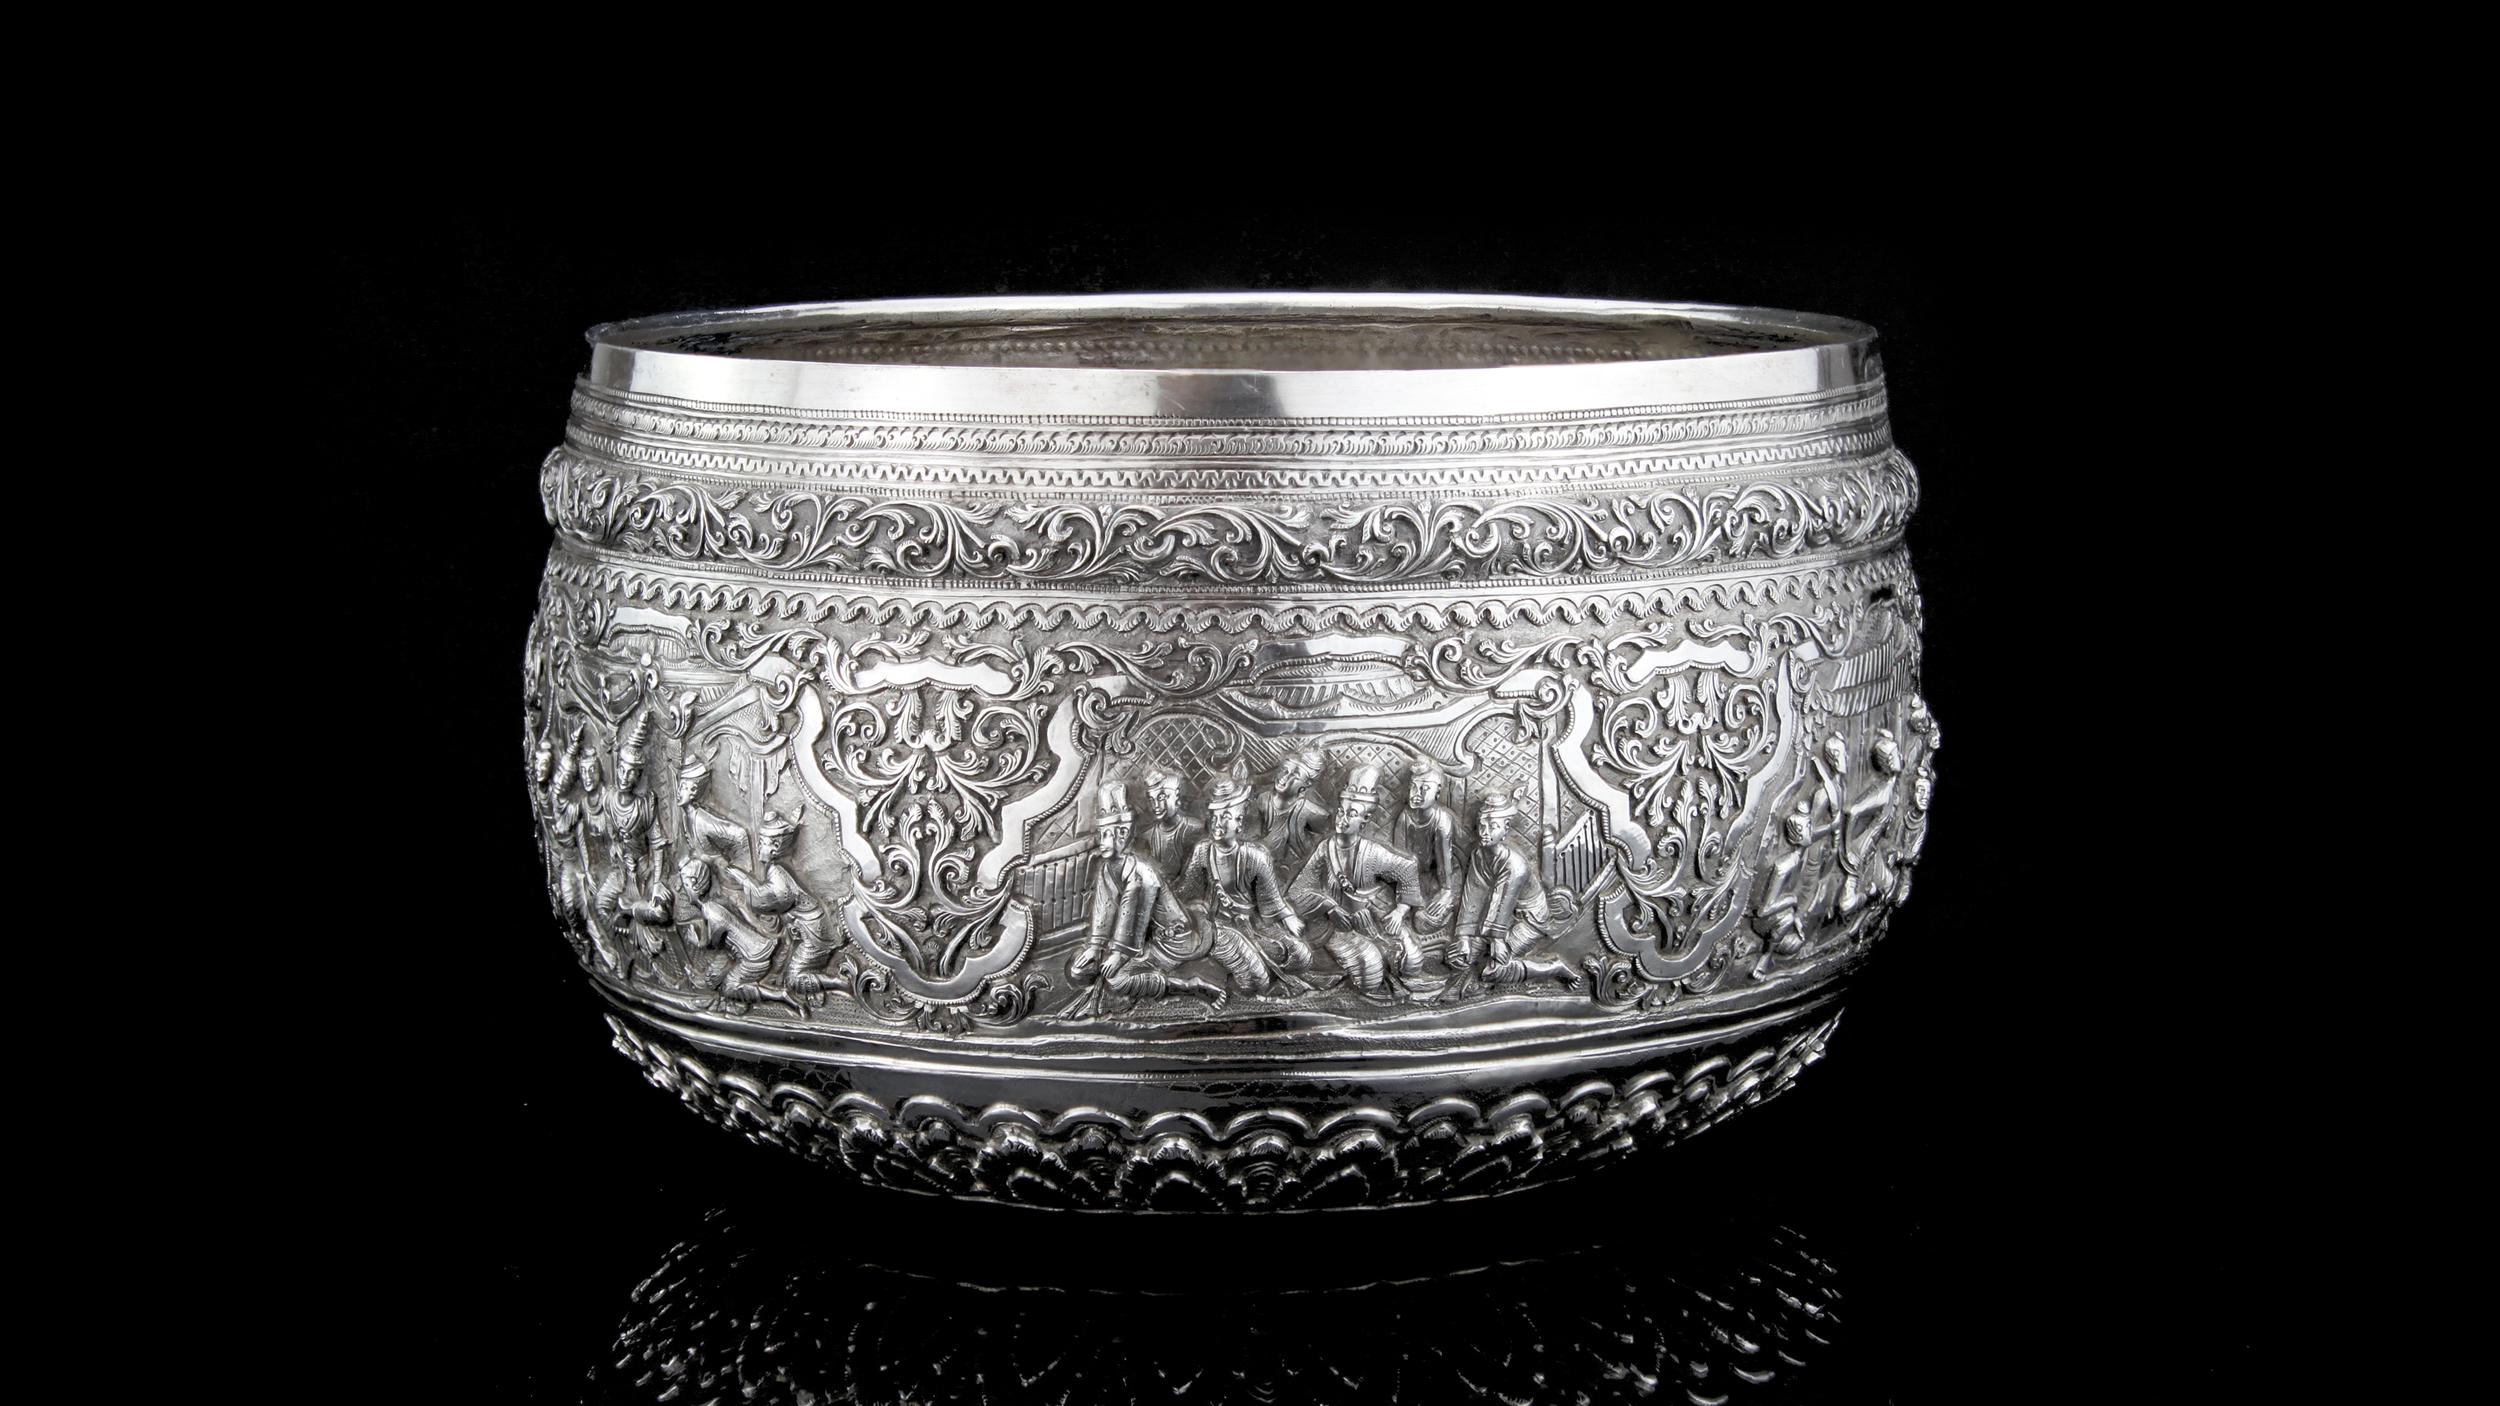 Antique 19th century Burmese silver thabeik bowl repousseé decorated in high relief depicting scenes from the traditional culture which includes, hunting scenes, battle / war scenes, teaching scenes, praying and dancing. The figures in this bowl are